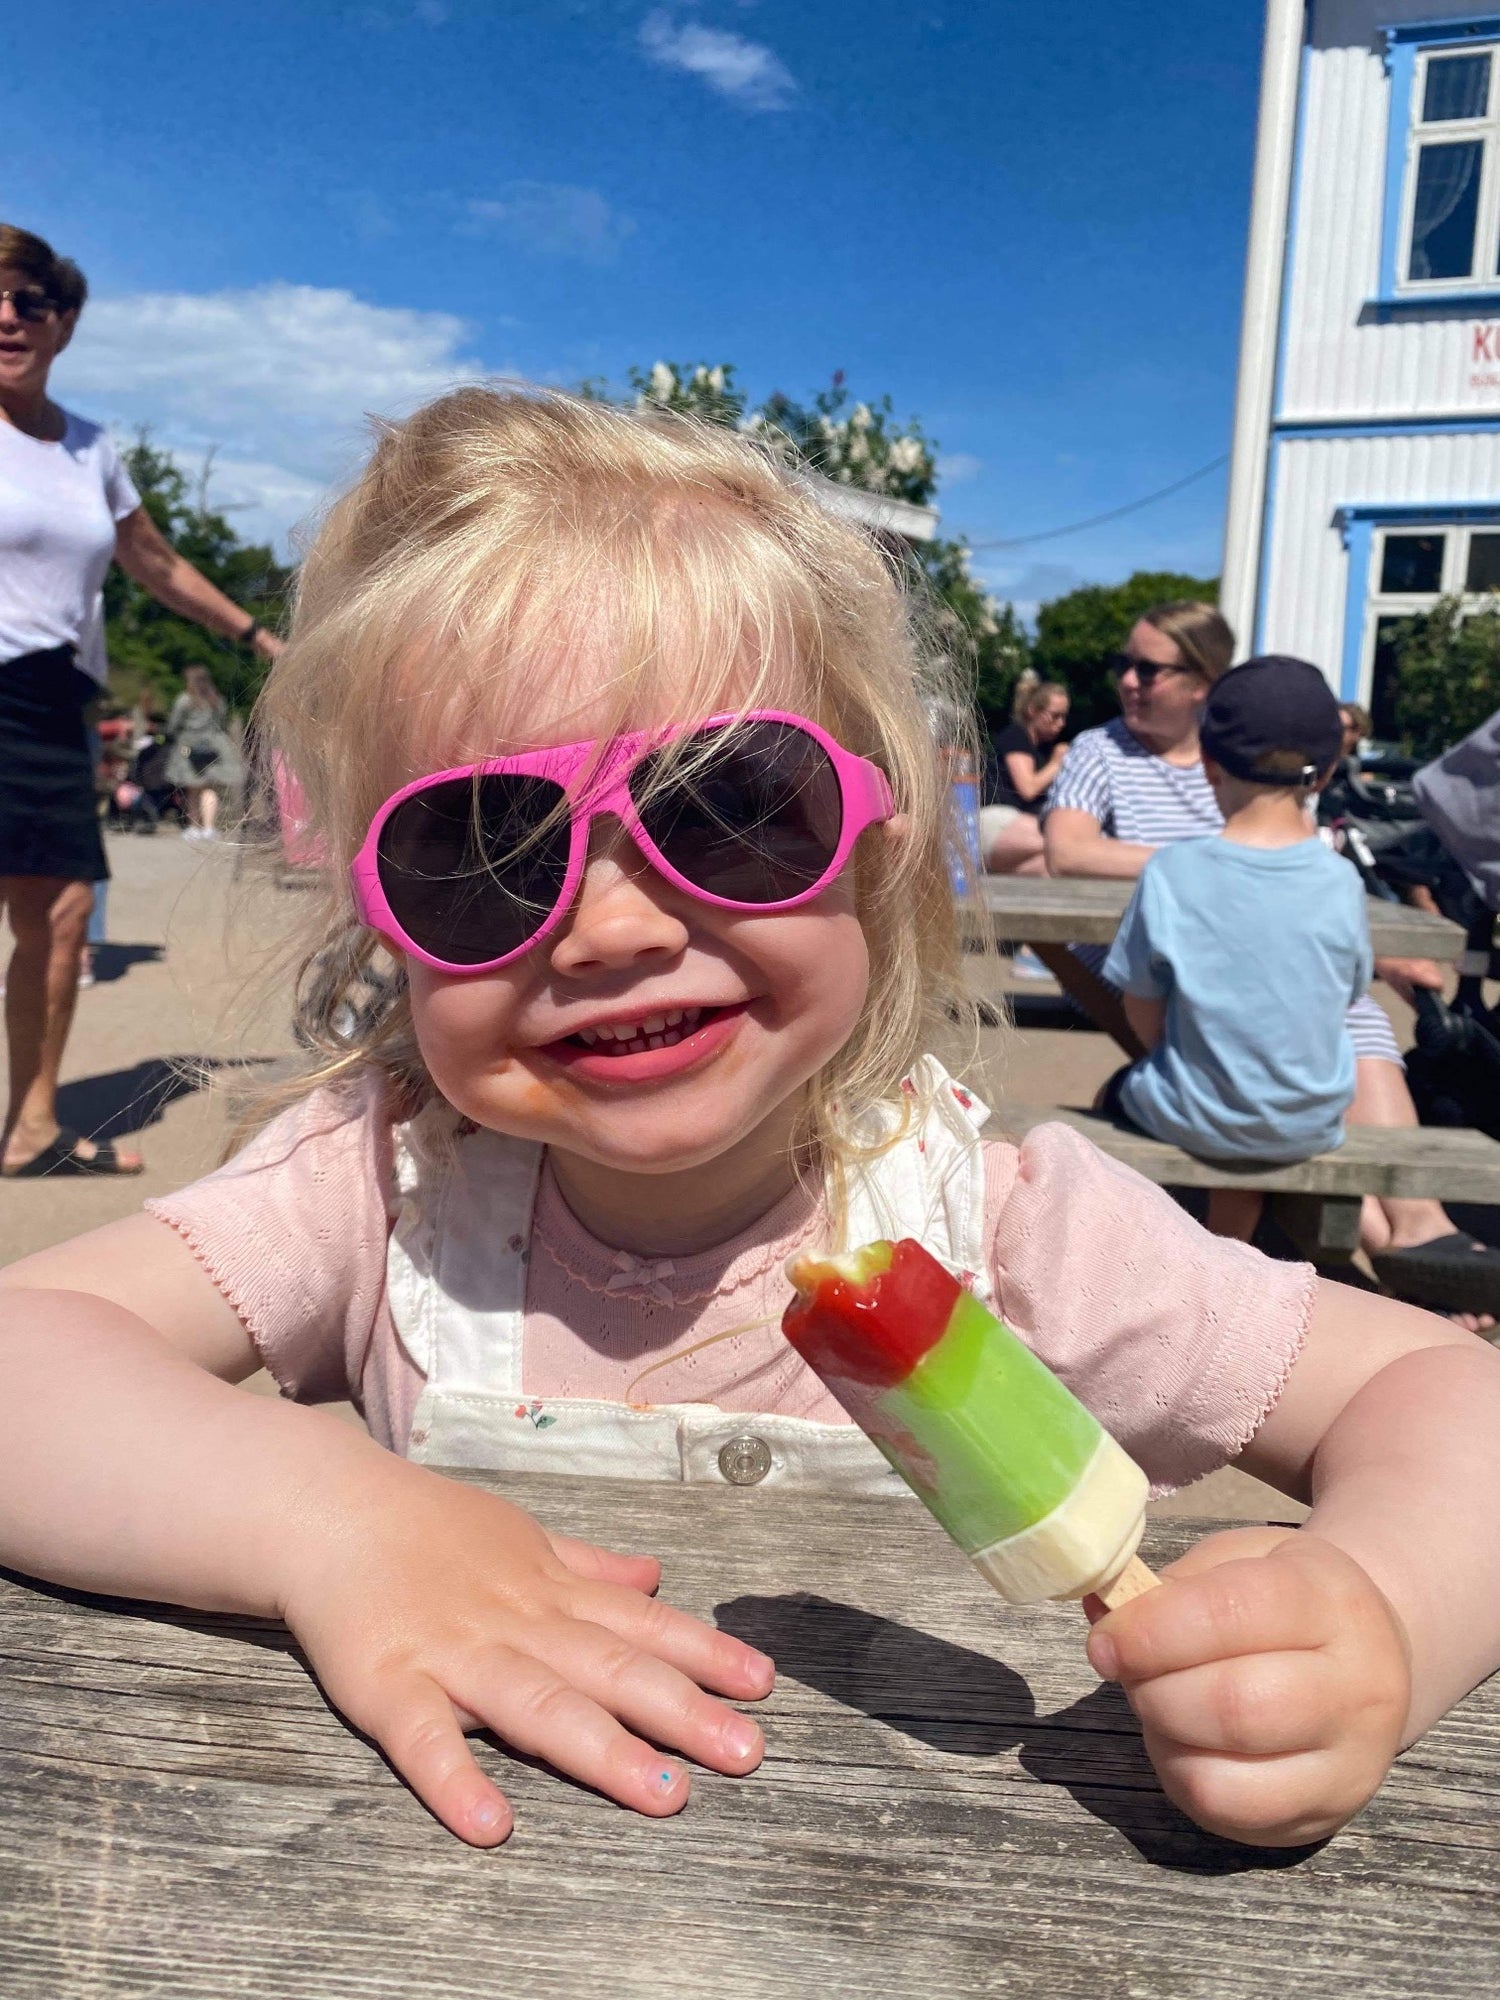 A young girl enjoying her ice cream in the sun wearing sunglasses from Mokki